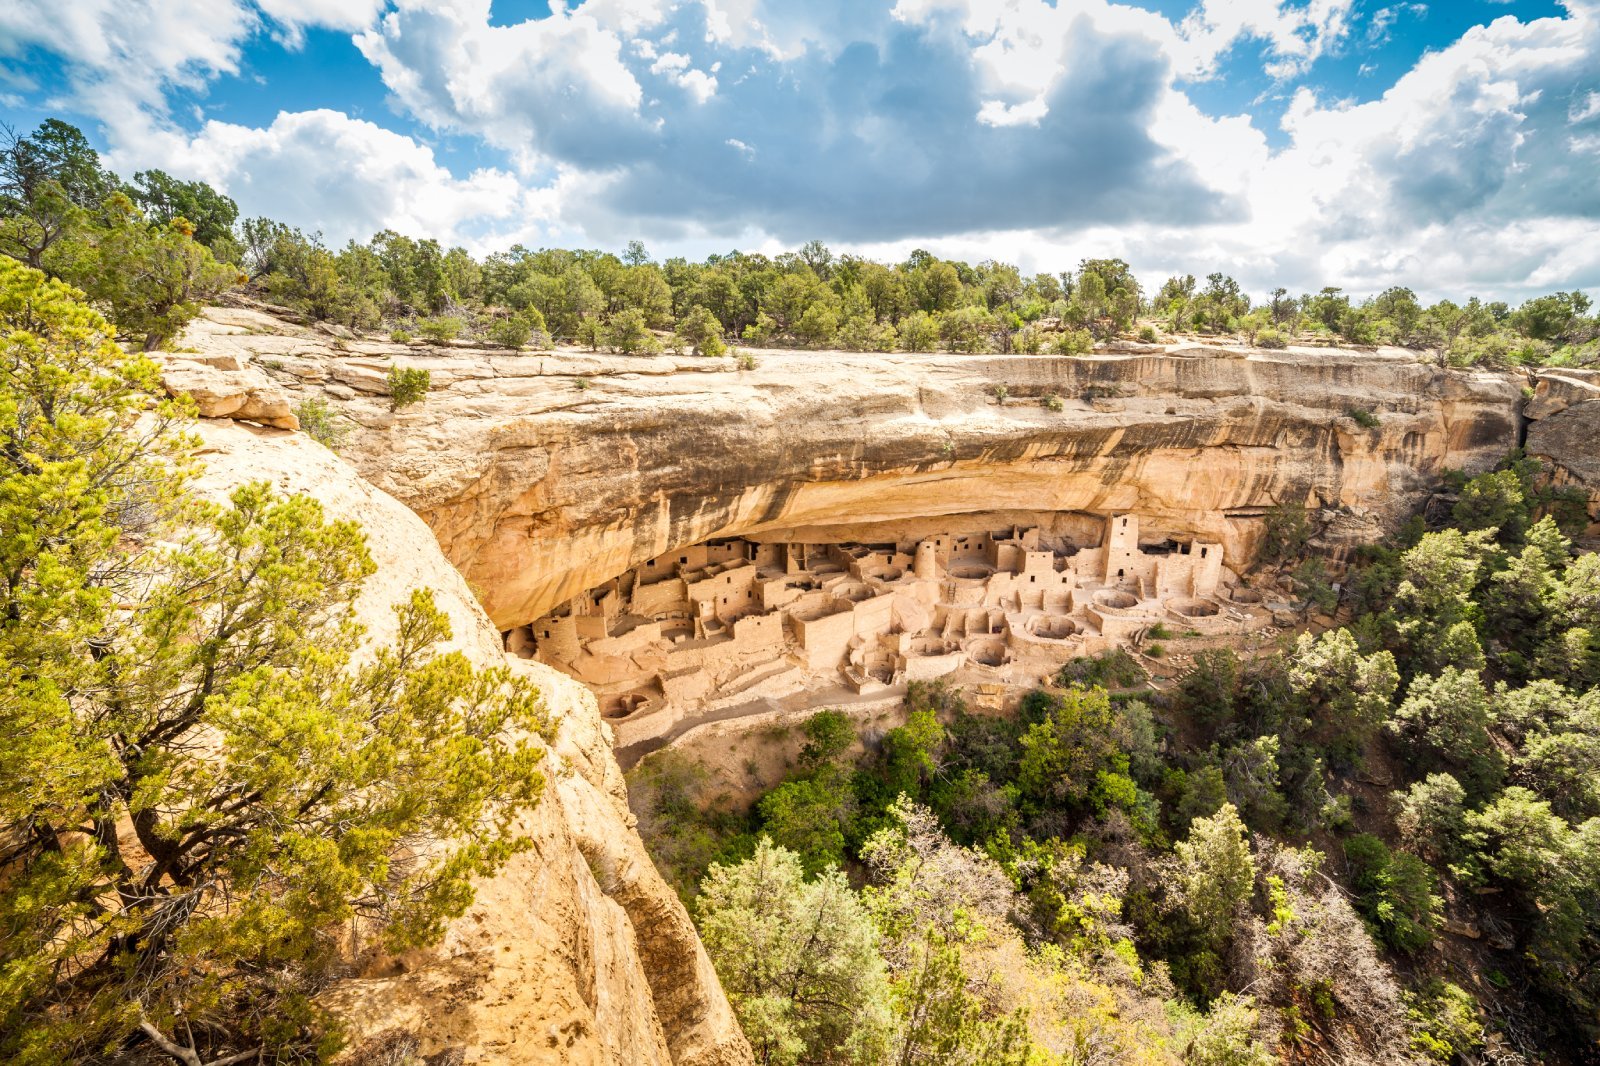 <p class="wp-caption-text">Image Credit: Shutterstock / Sopotnicki</p>  <p><span>Mesa Verde National Park offers a unique opportunity to explore the ancient cliff dwellings of the Ancestral Pueblo people, who lived there from AD 600 to 1300. The park protects over 4,000 archaeological sites, including 600 cliff dwellings, making it one of the most significant archaeological preserves in the United States. Guided tours of sites like Cliff Palace and Balcony House provide insight into the lives of the Ancestral Puebloans, their architectural ingenuity, and their relationship with the landscape.</span></p>